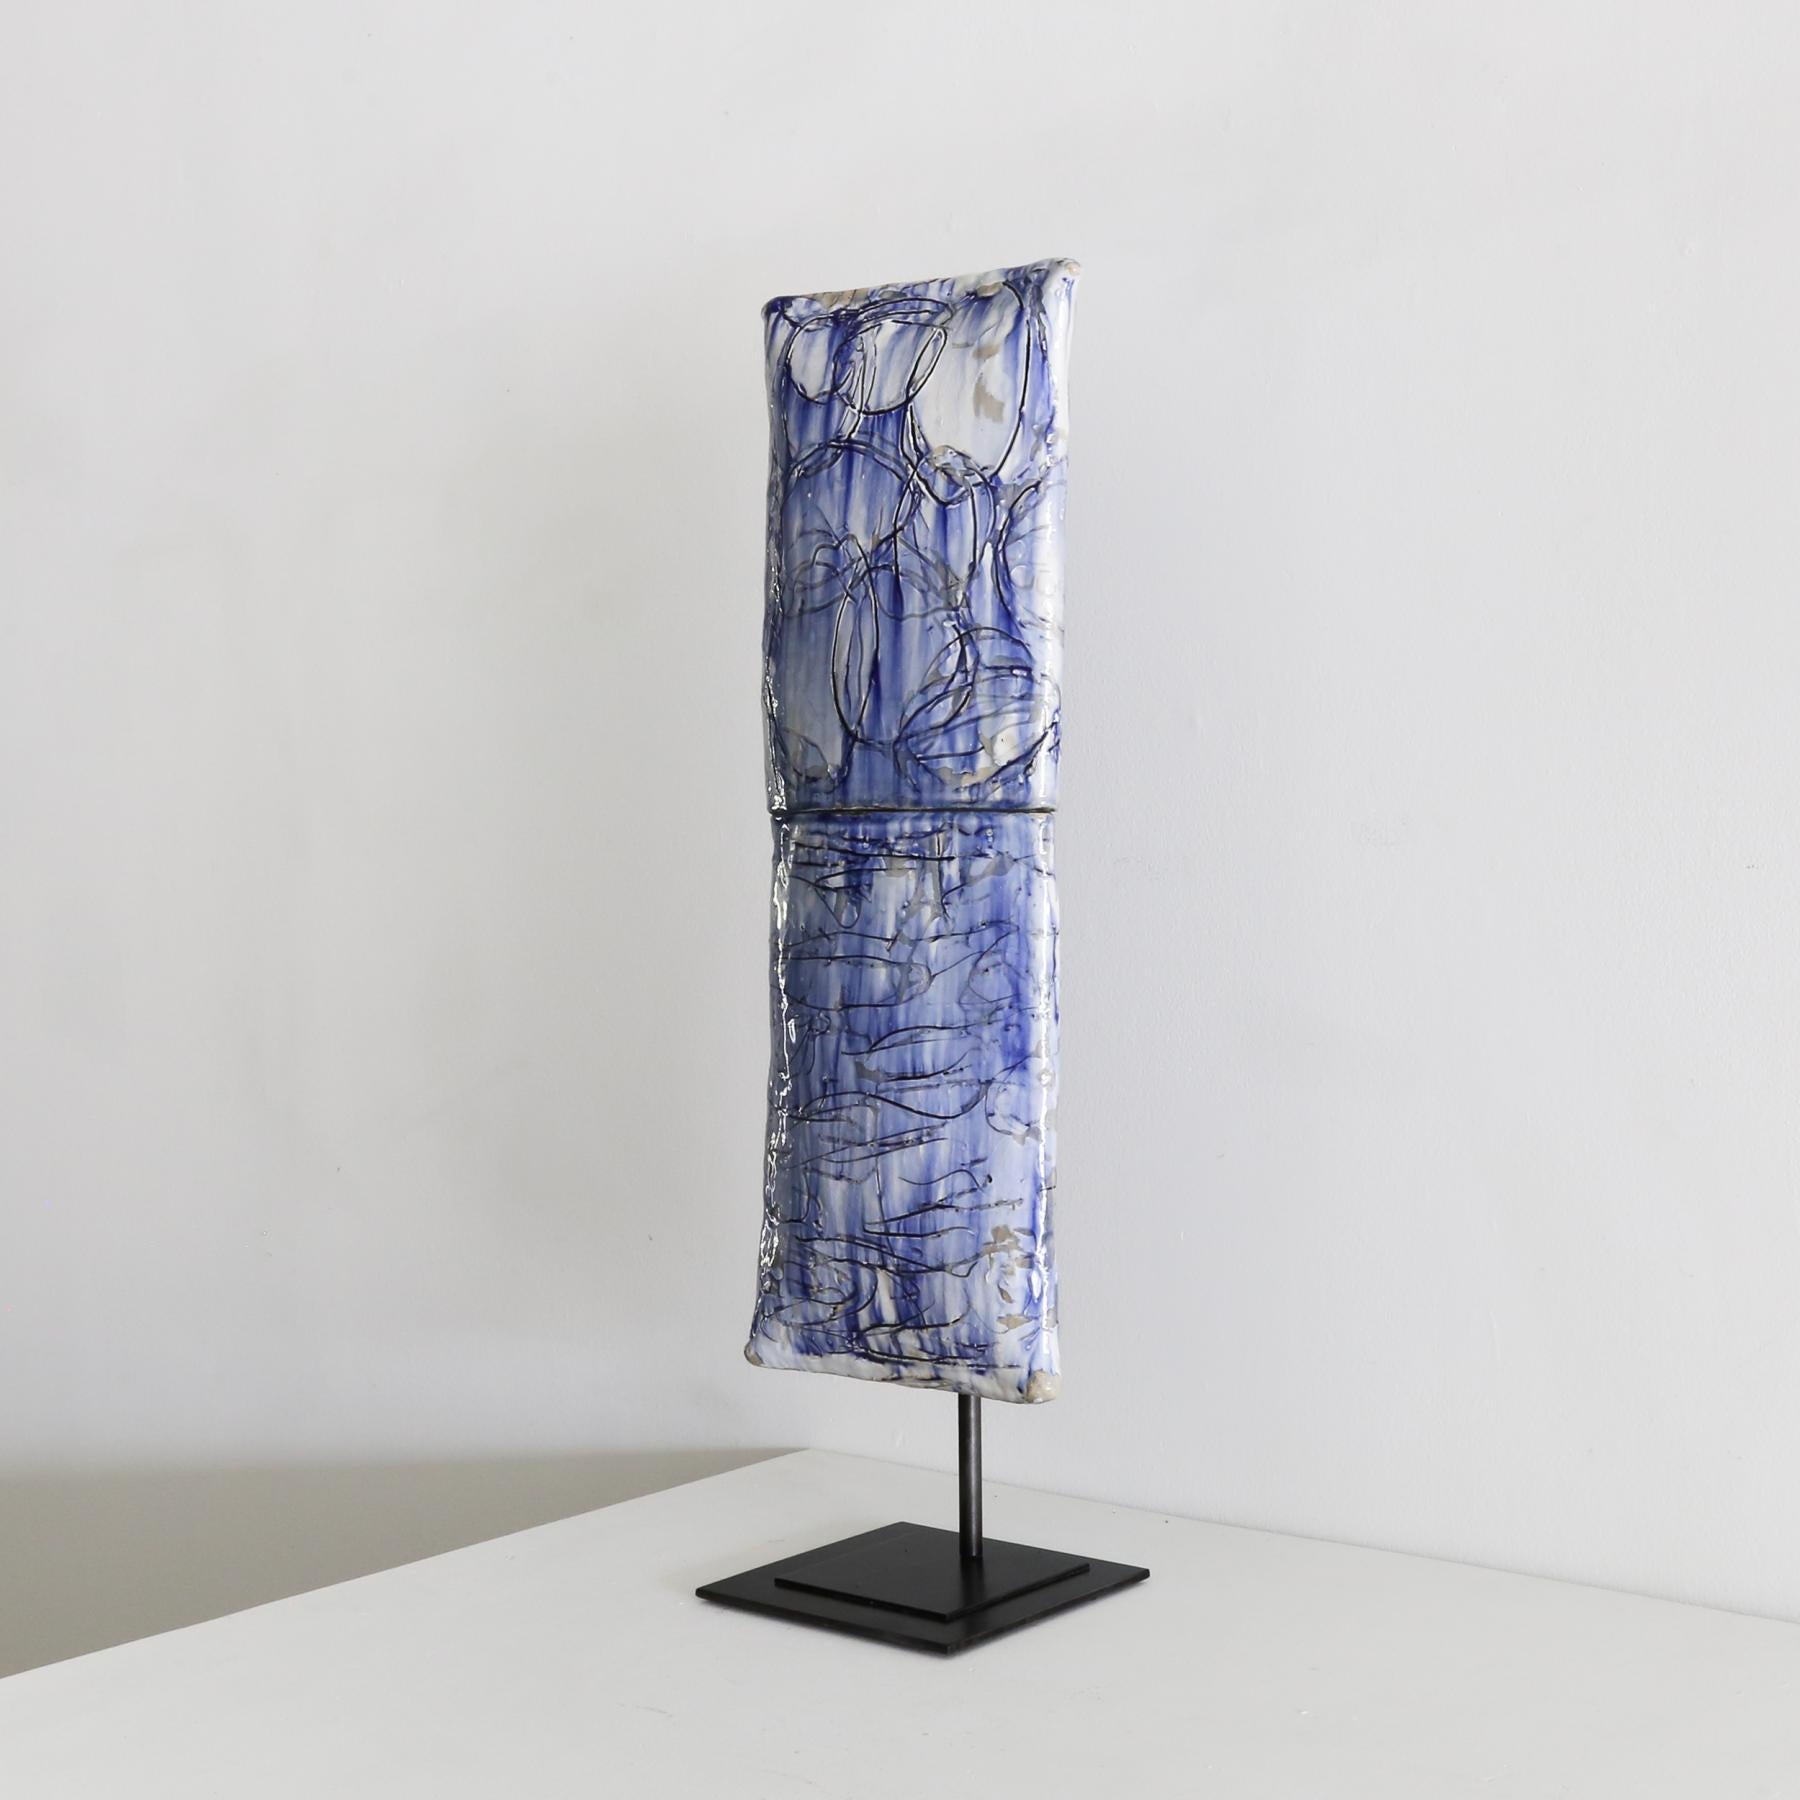 BRANDON REESE
Atmosphere
• glazed stoneware on steel stand
11.00w x 29.00h x 3.00d in
$4,200.00